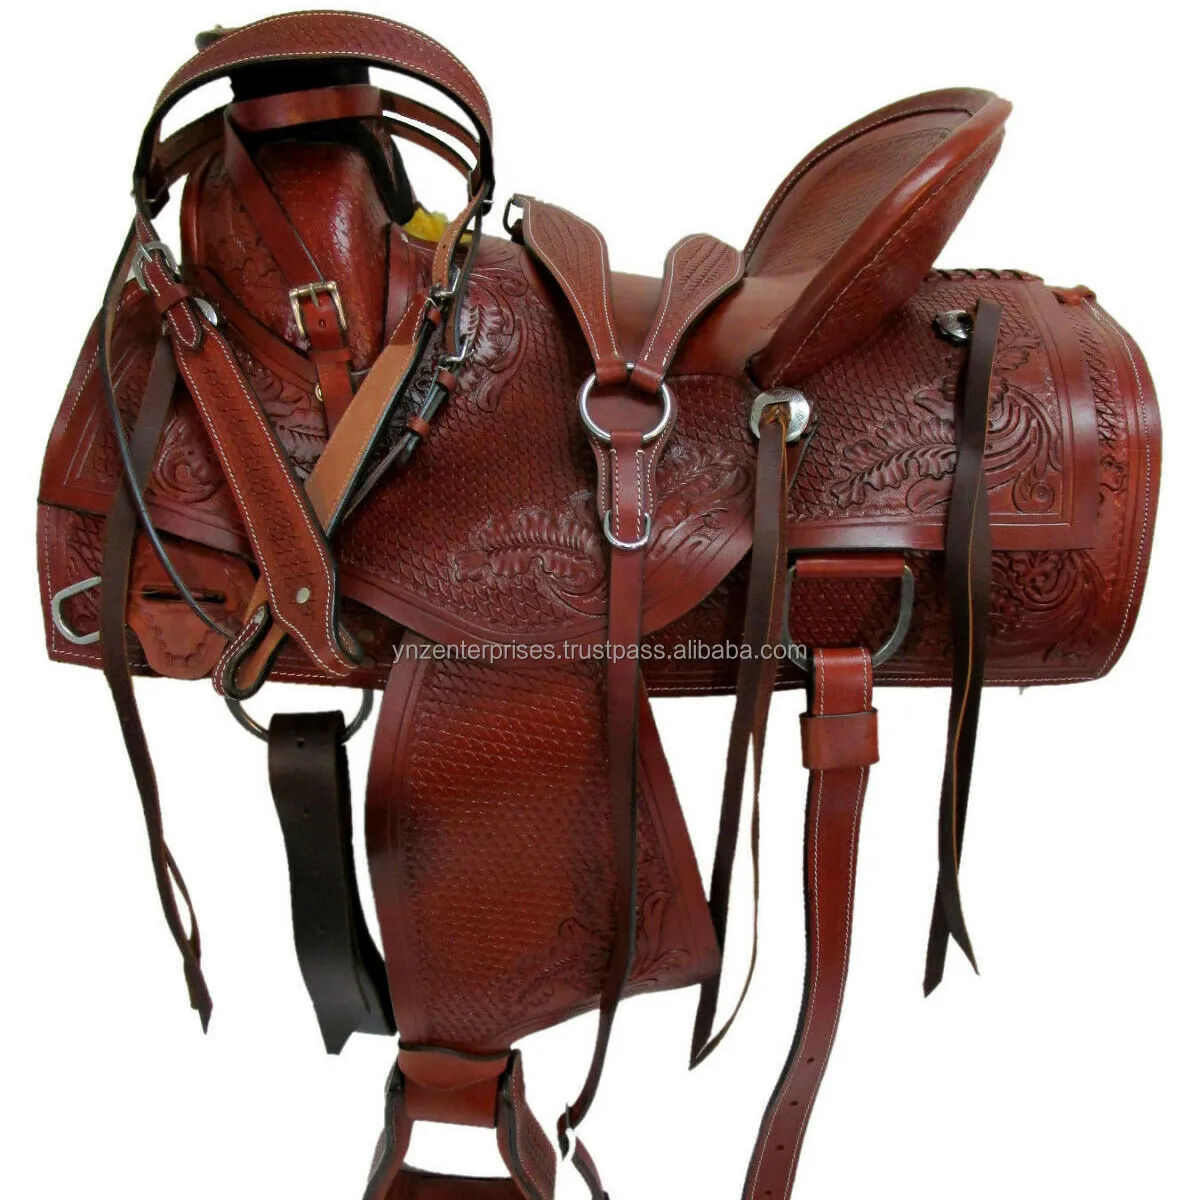 Y&Z Genuine Leather Wade Saddle For Horse High Premium Quality Available Whole Sale Price Horse Equestrian Wade Saddle Suppliers